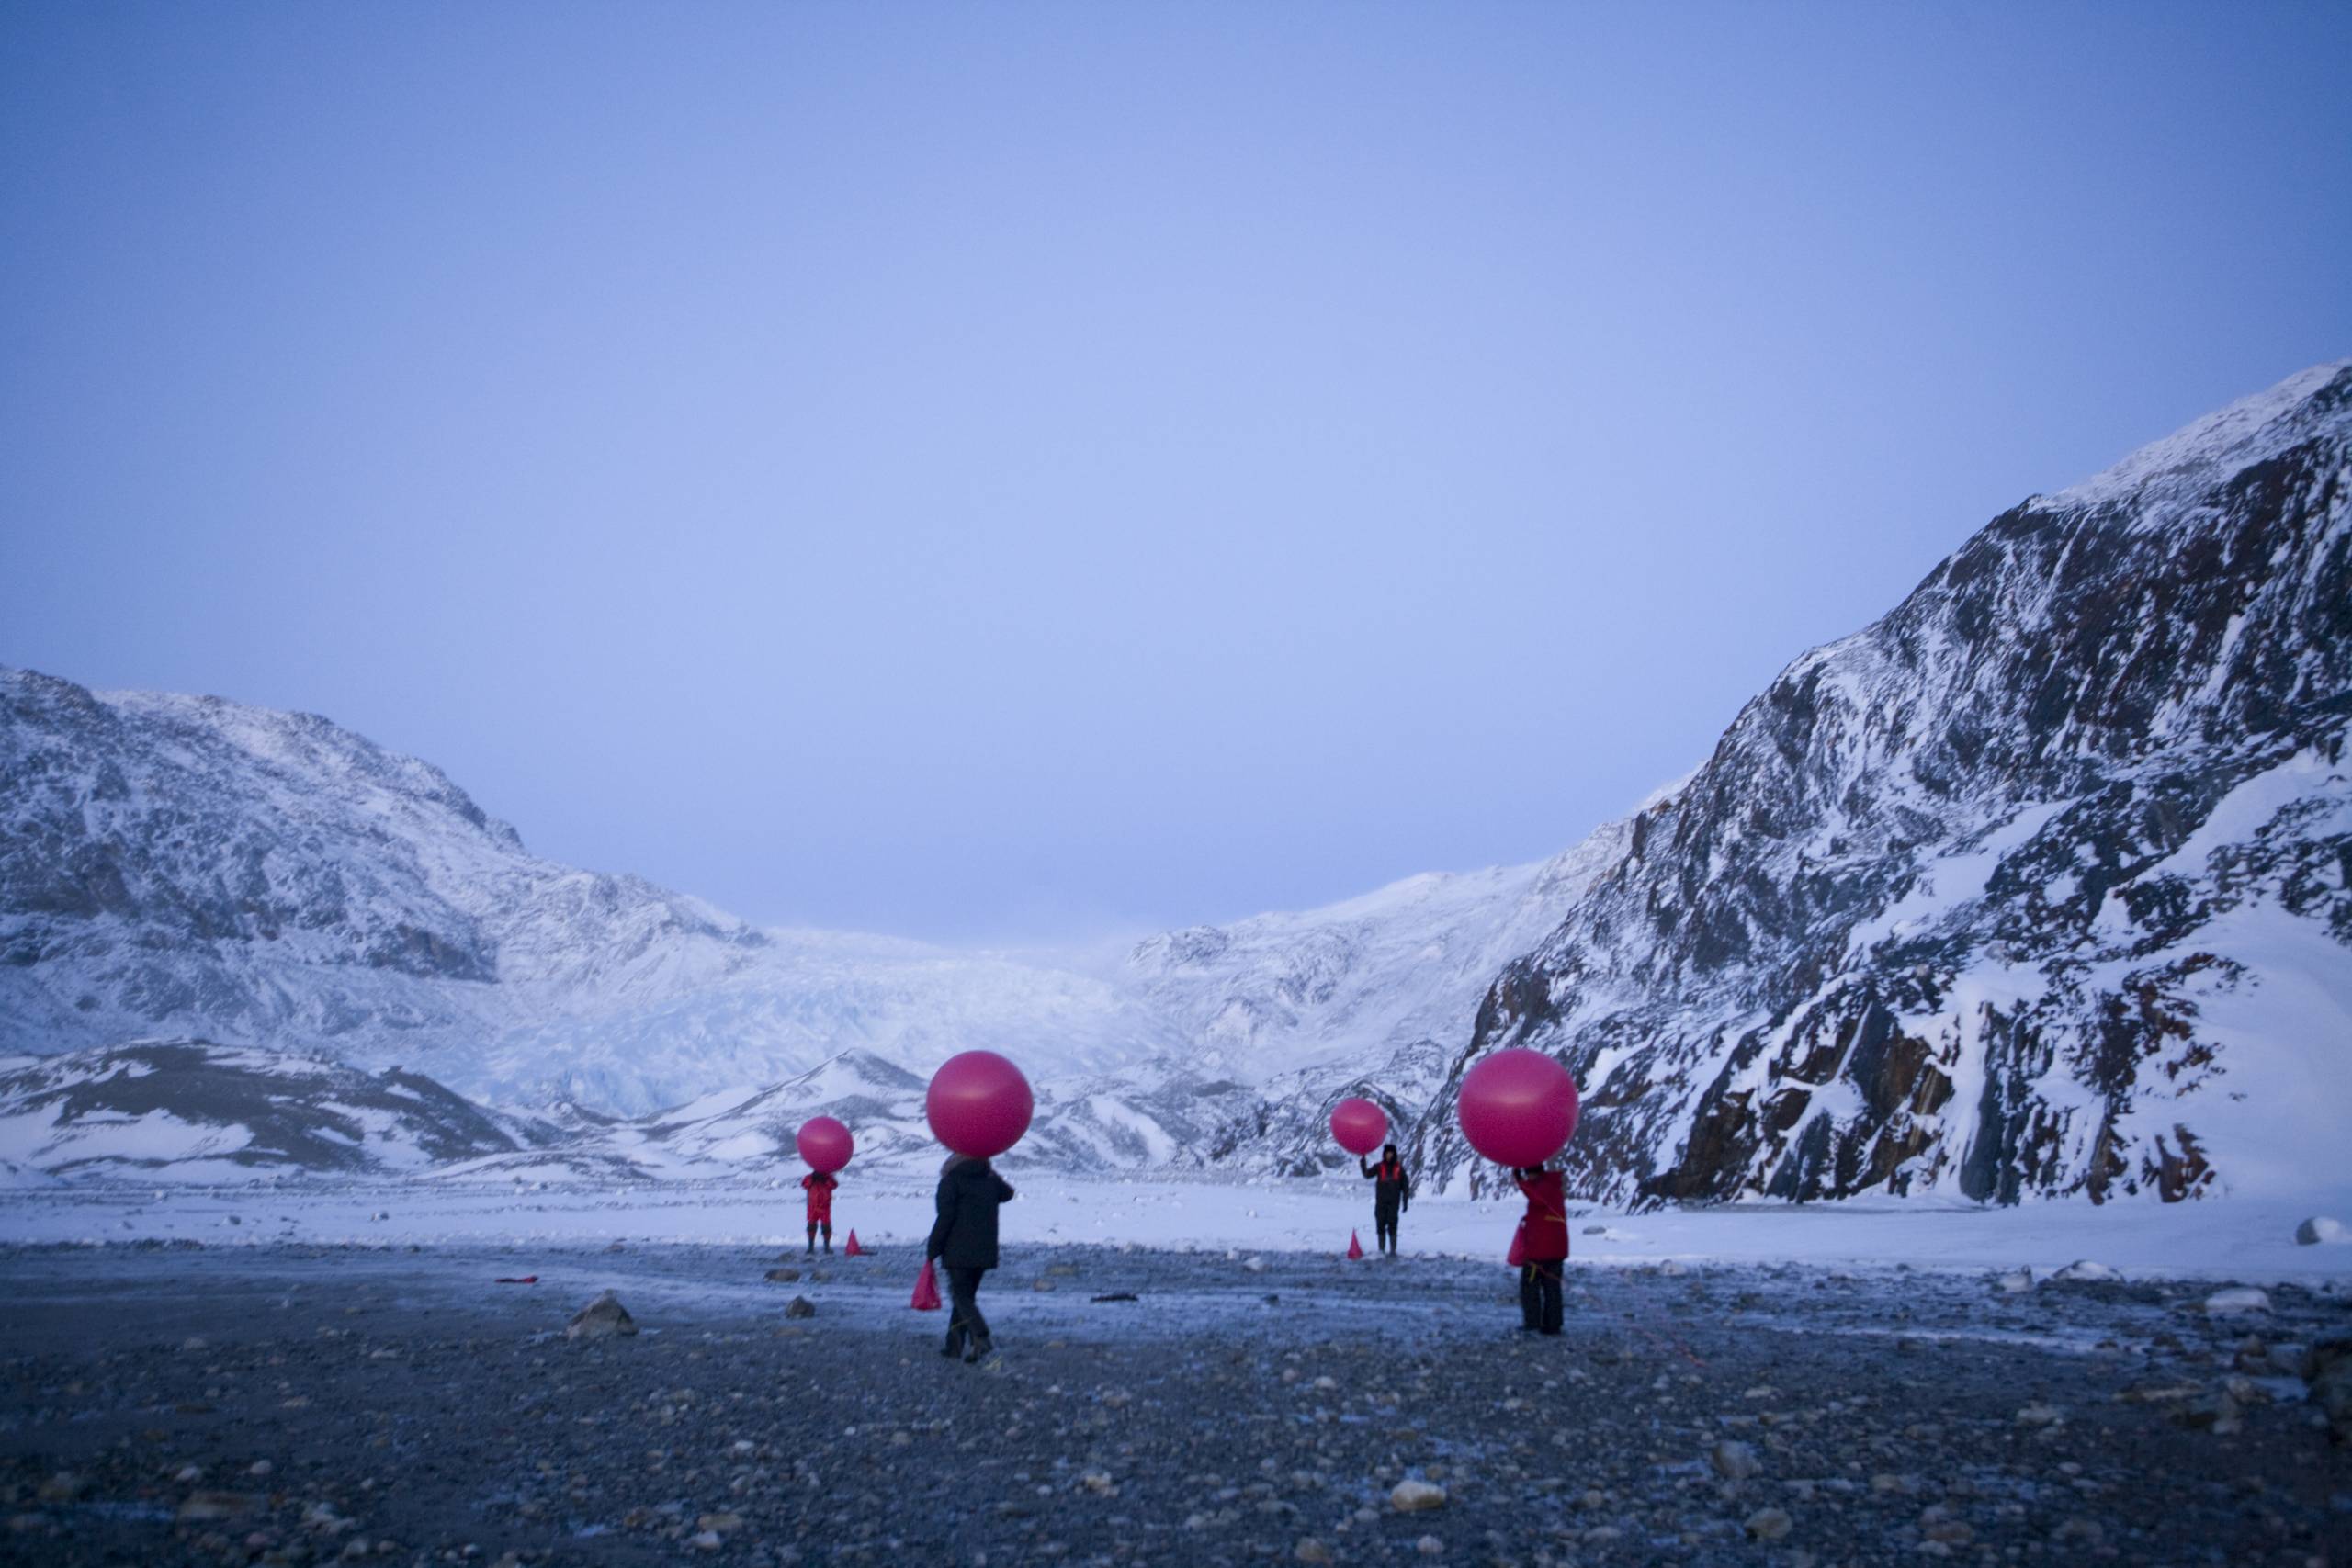 4 figures holding weather balloons in an Arctic landscape